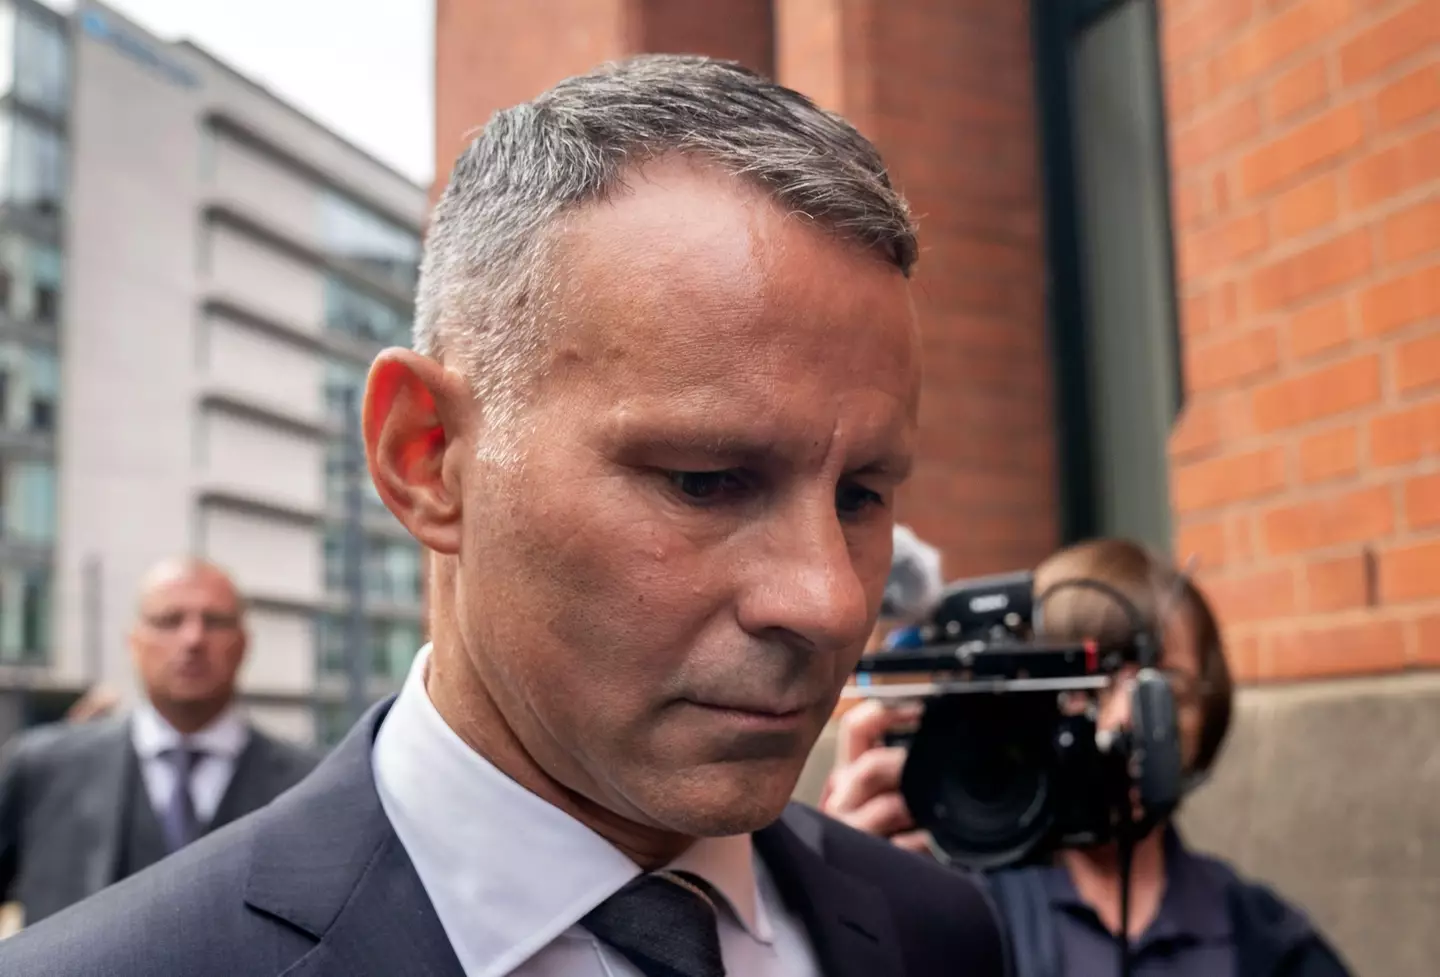 Giggs' trial began at Manchester Minshull Street Crown Court on Monday (Image: Alamy)